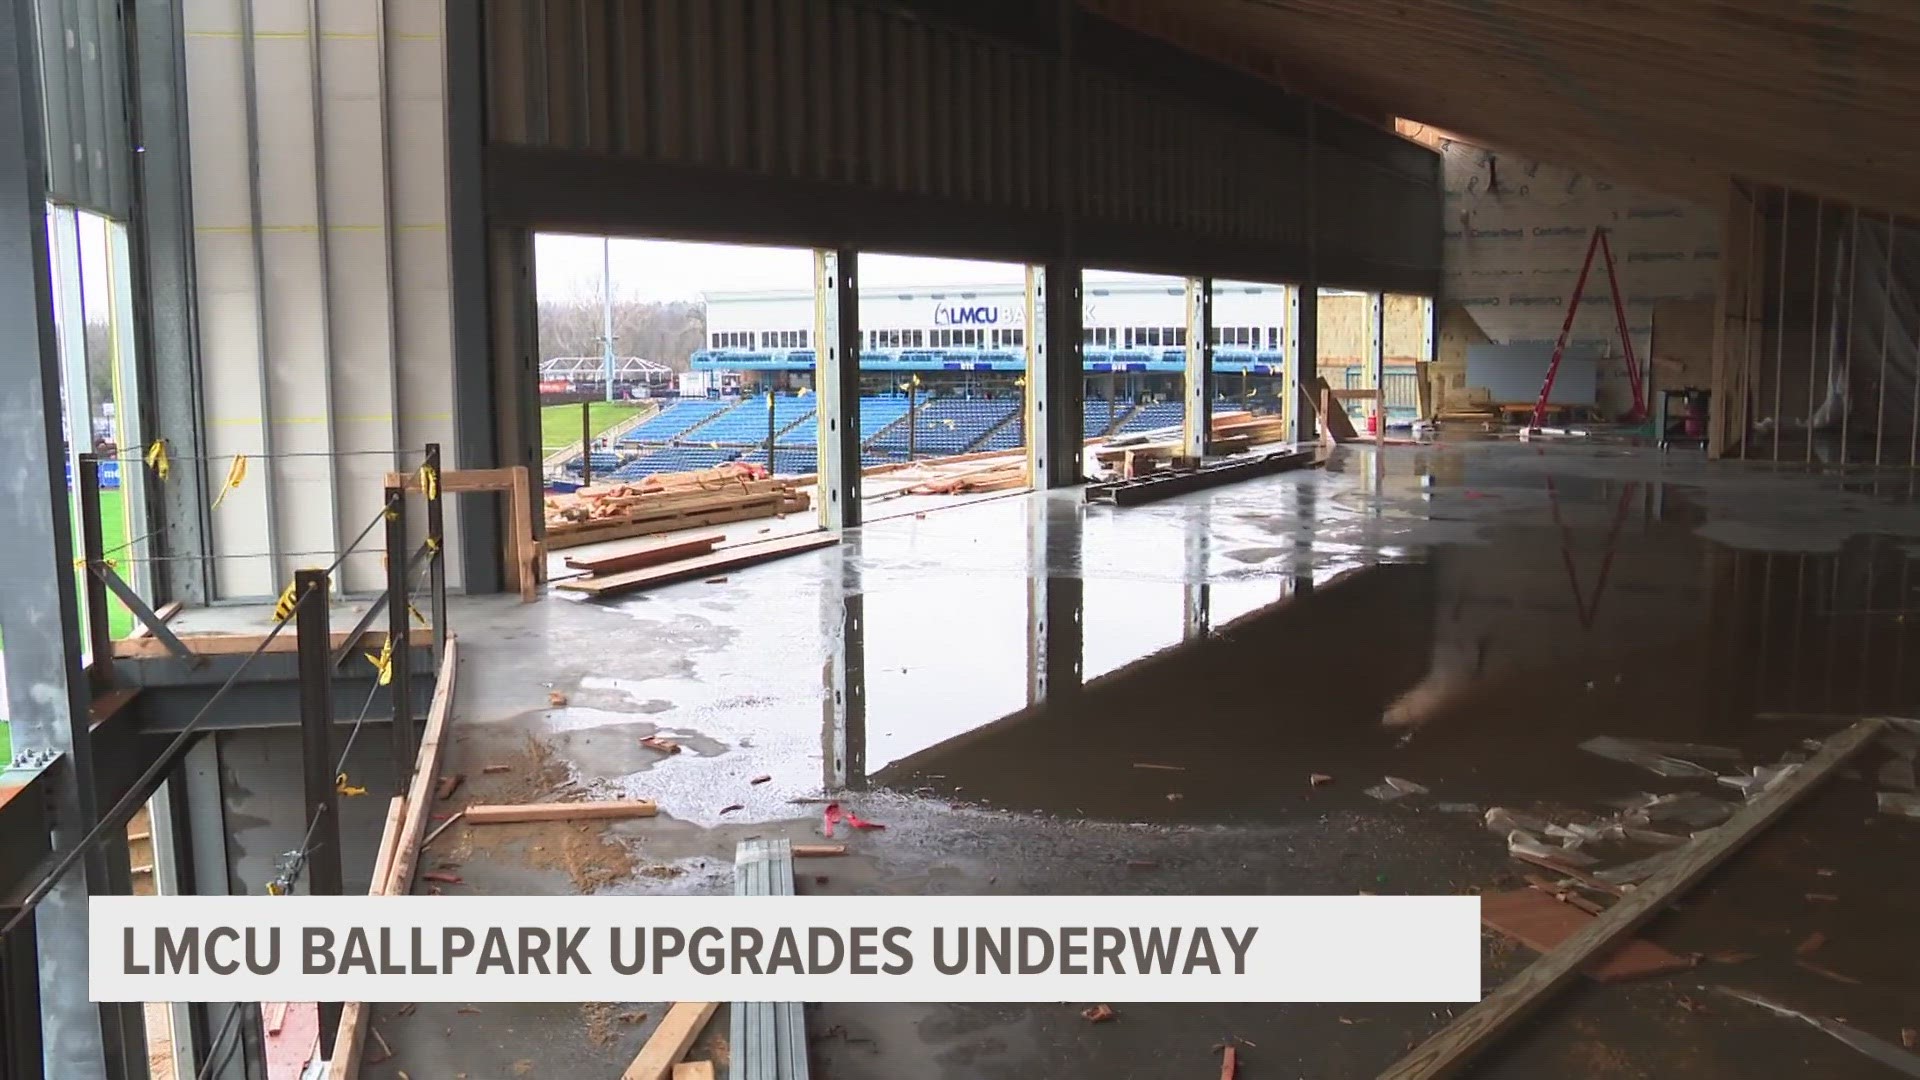 When LMCU Ballpark opens next week for the 2024 West Michigan Whitecaps season, you'll notice a brand new area under construction.